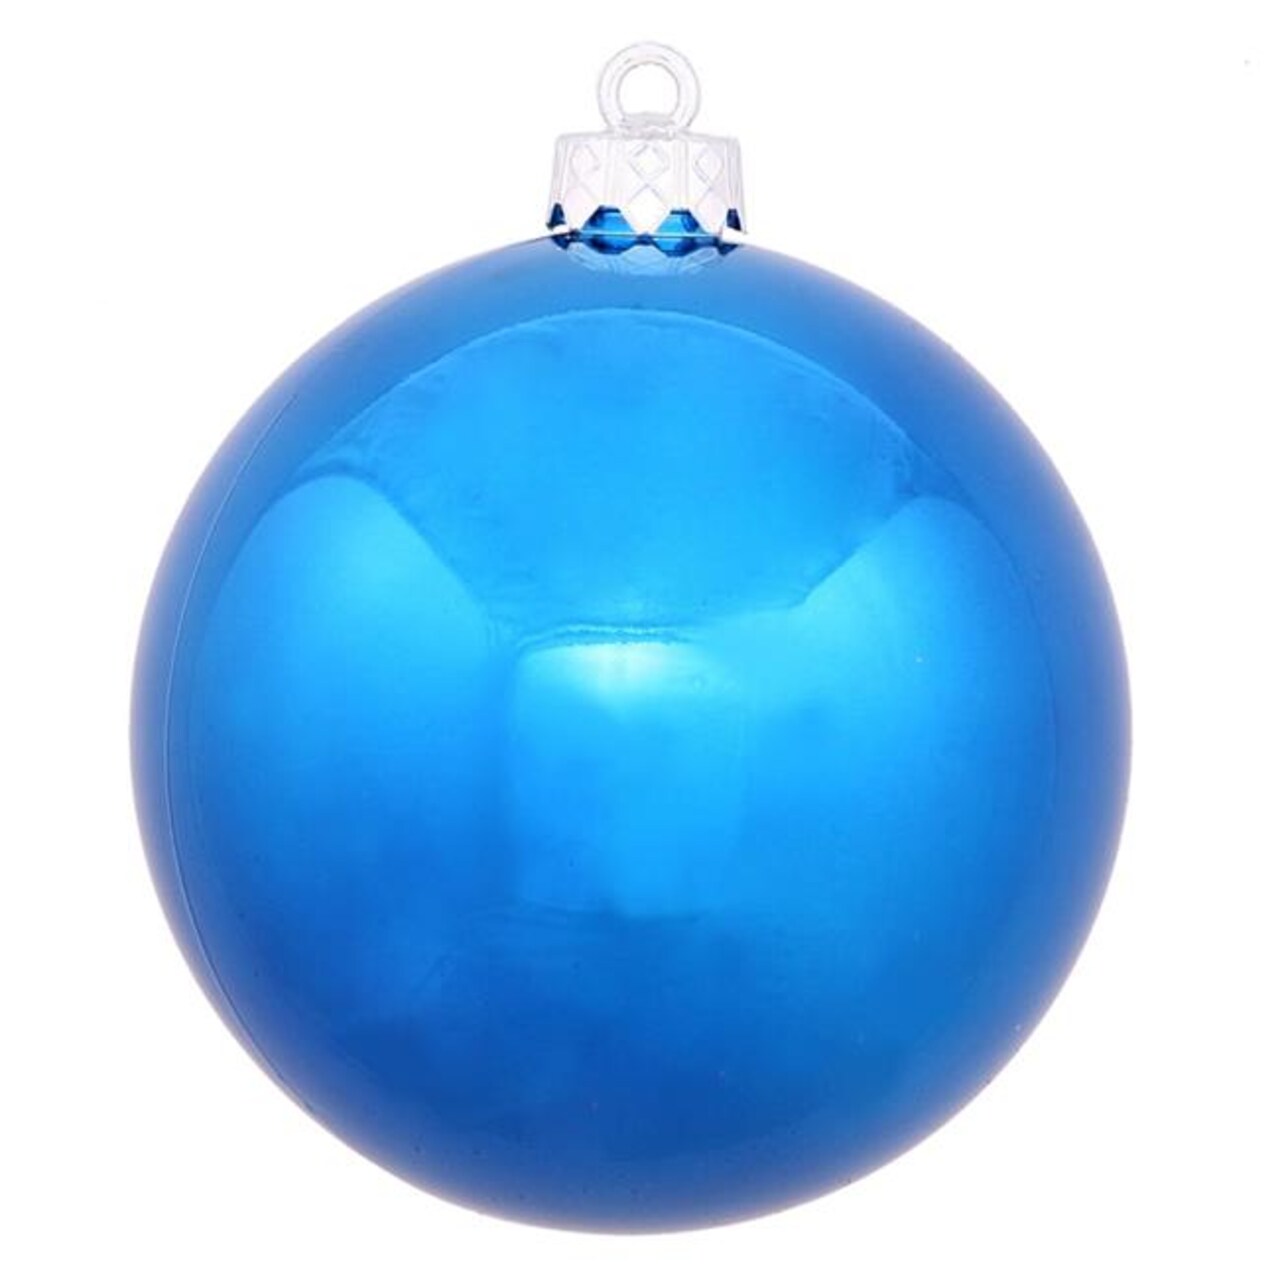 Vickerman 31749088 Shiny Blue UV Resistant Commercial Drilled Shatterproof Christmas Ball Ornament - 2.75 in.